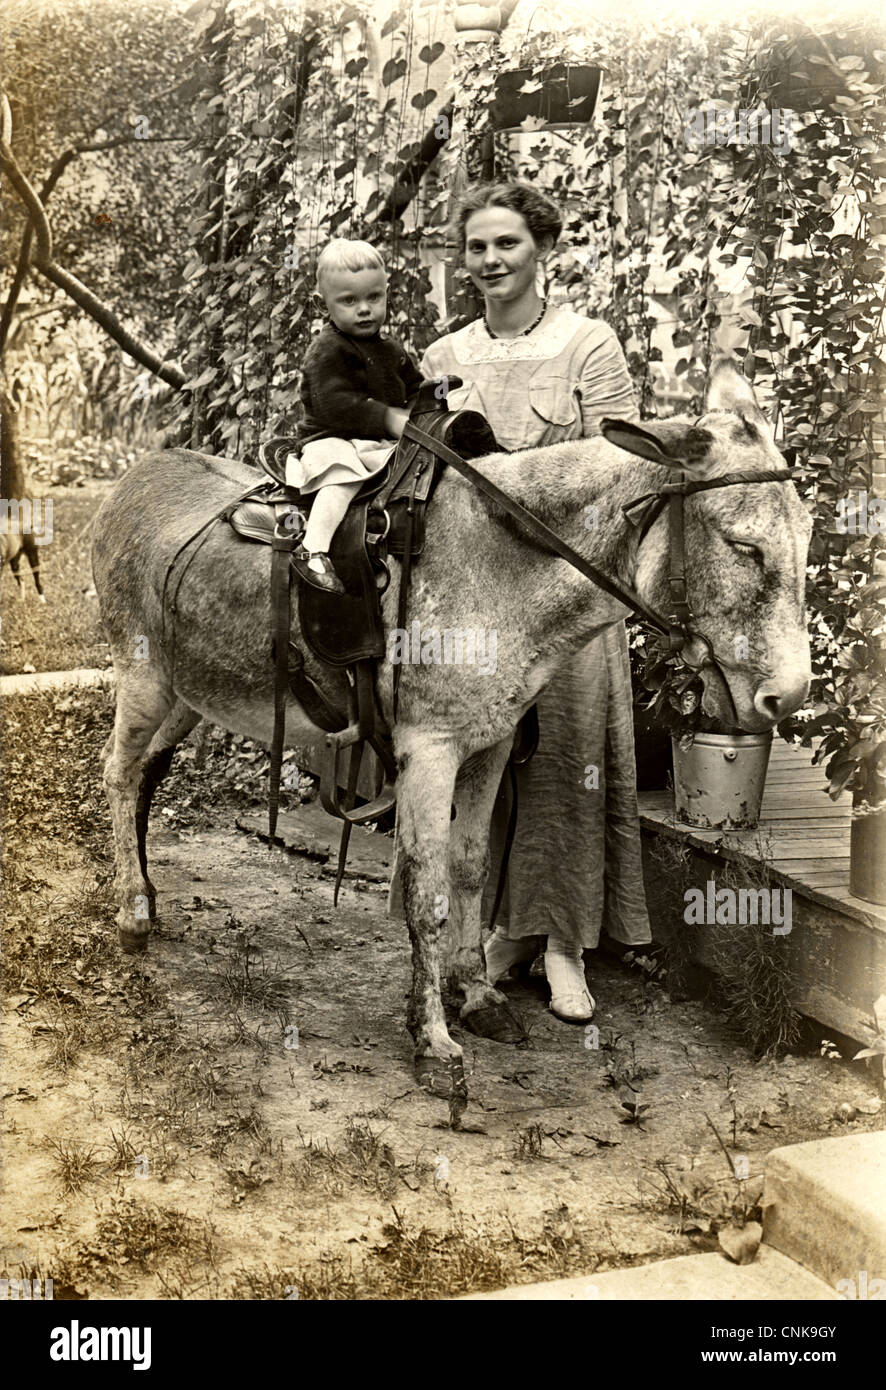 Pretty Young Mother with Young Son Riding Donkey Stock Photo